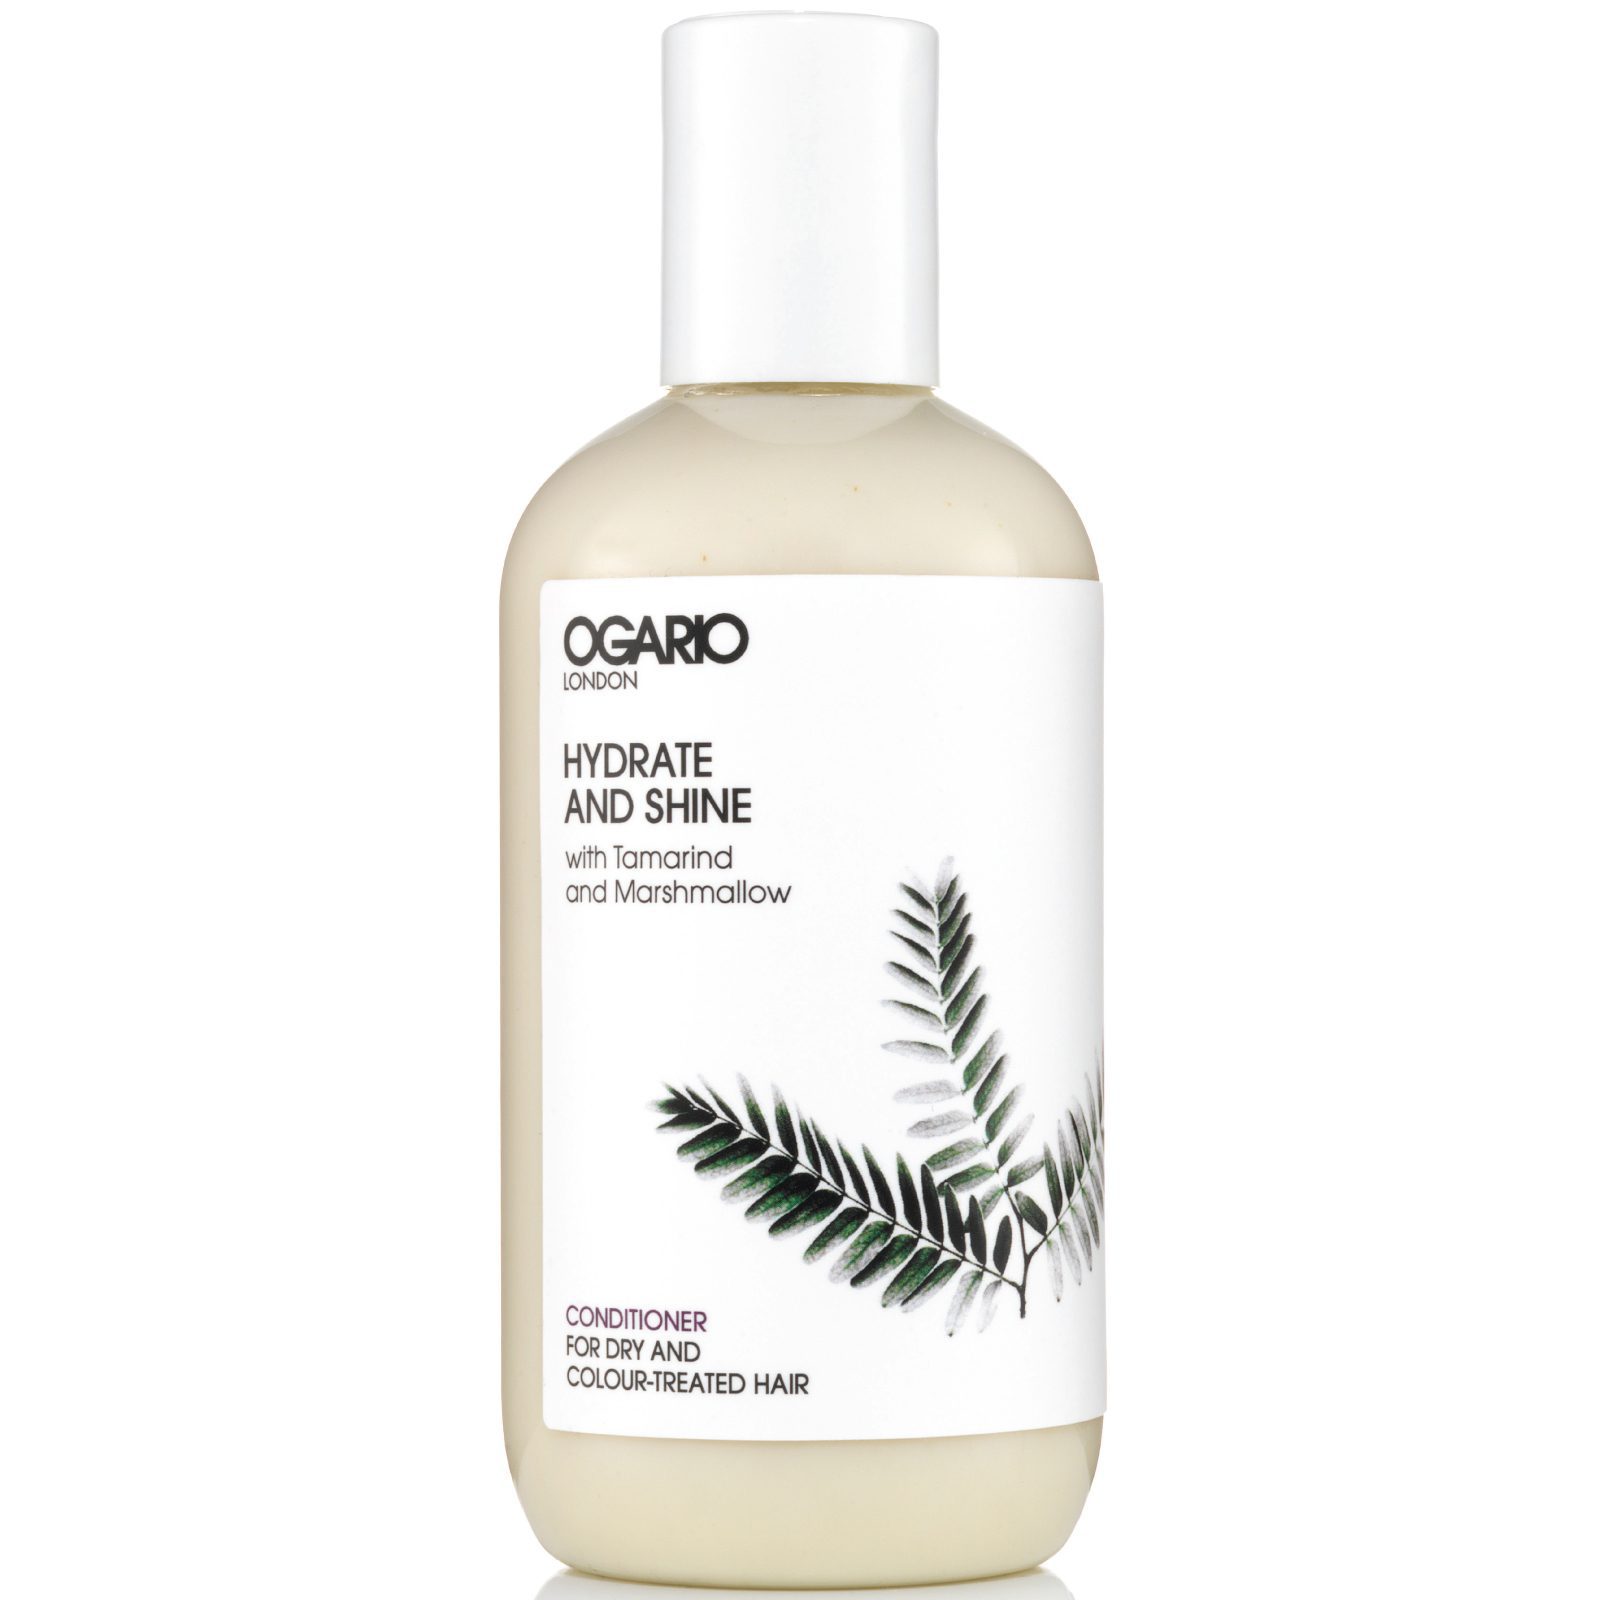 Hydrate and Shine Conditioner; Best for adding moisture to Dry, Damaged or Colour-Treated Hair